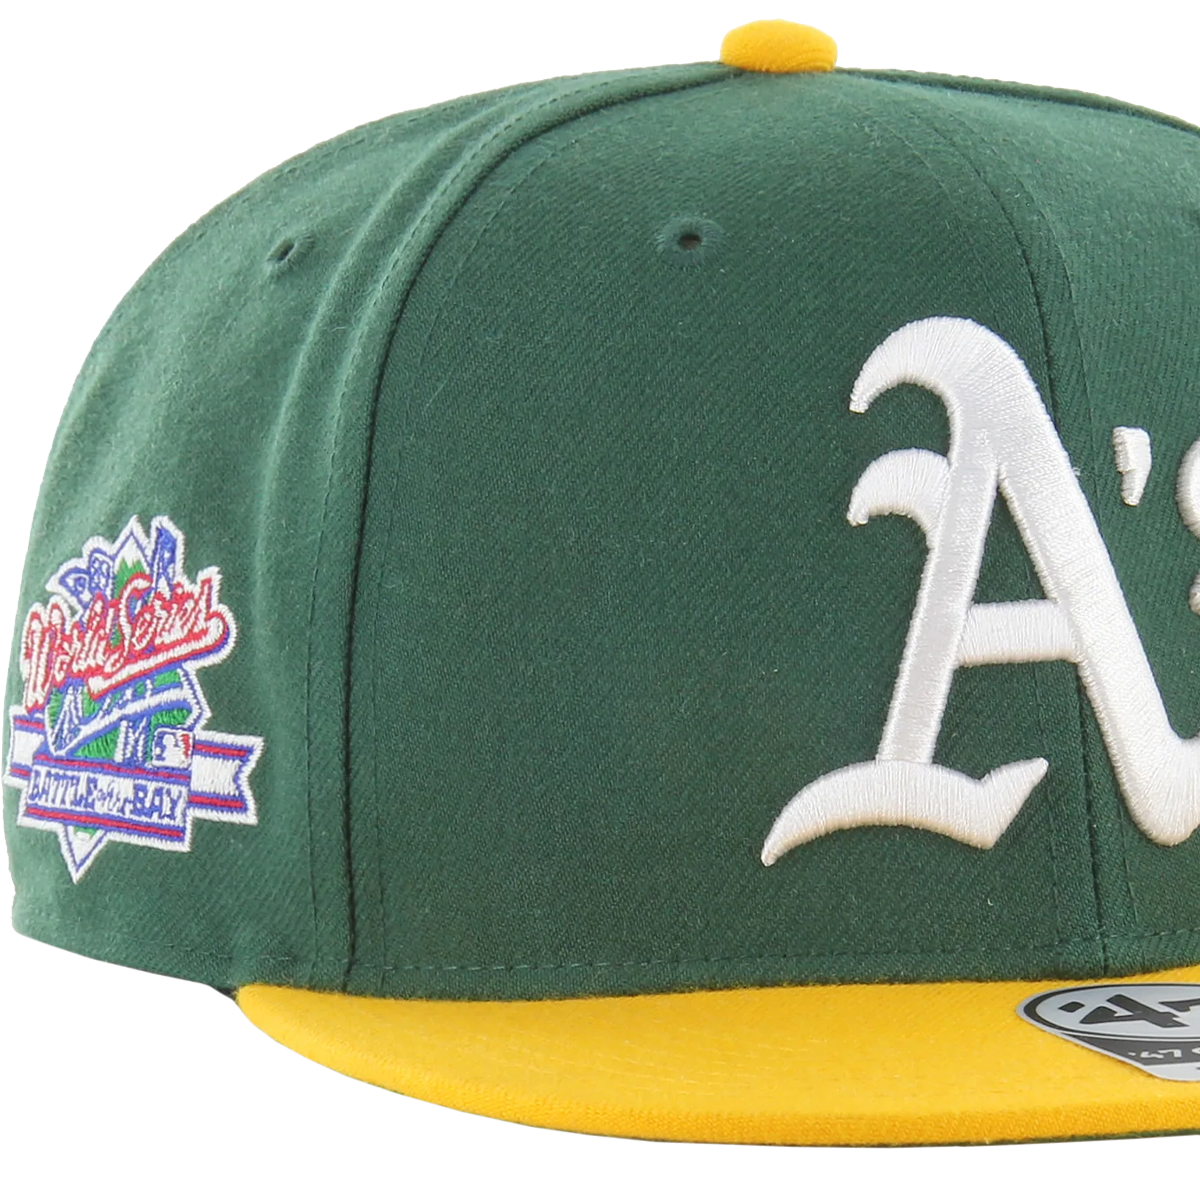 Men's '47 Brand Oakland Athletics 1989 World Series Patch Cooperstown  Collection Sure Shot Green Snapback Adjustable Cap